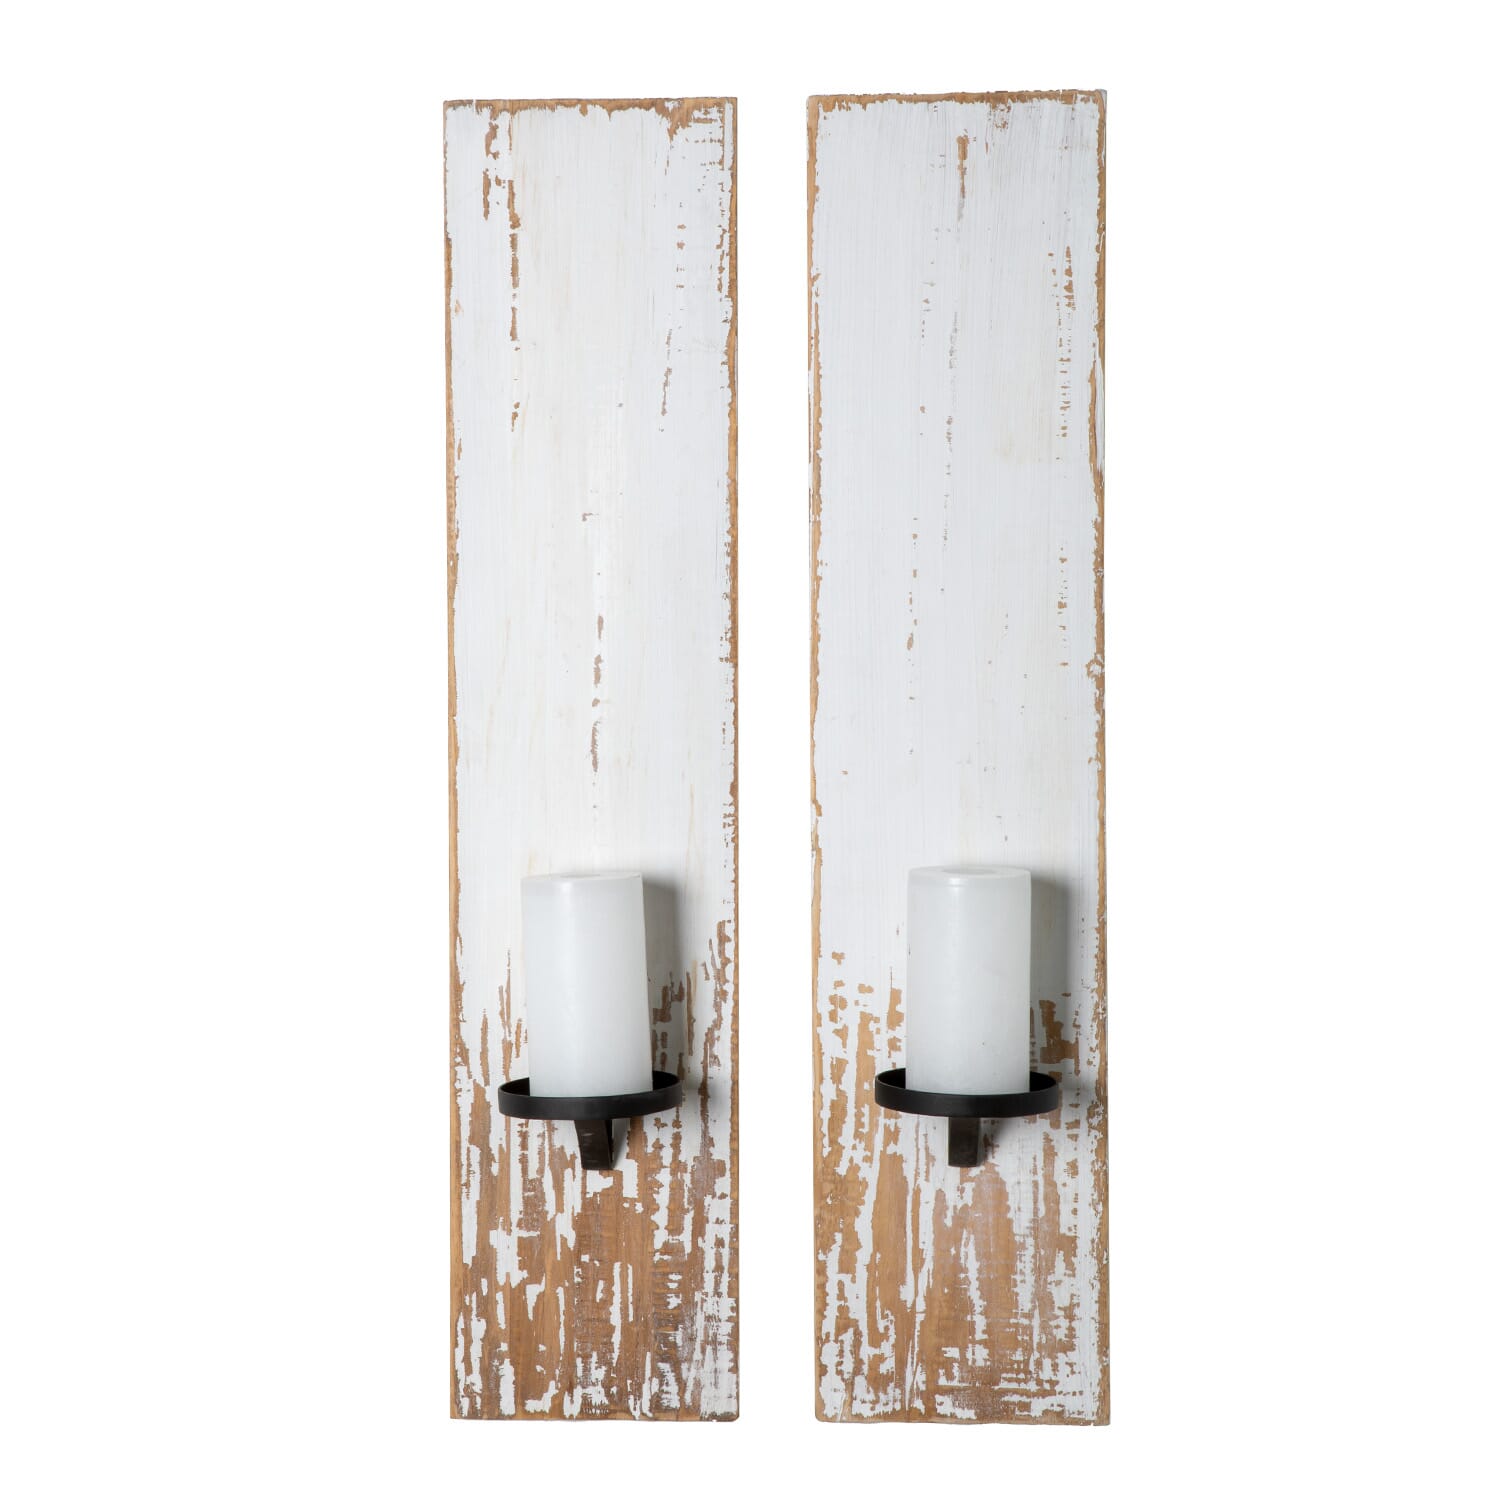 S/2 Wall Sconce - Antique White